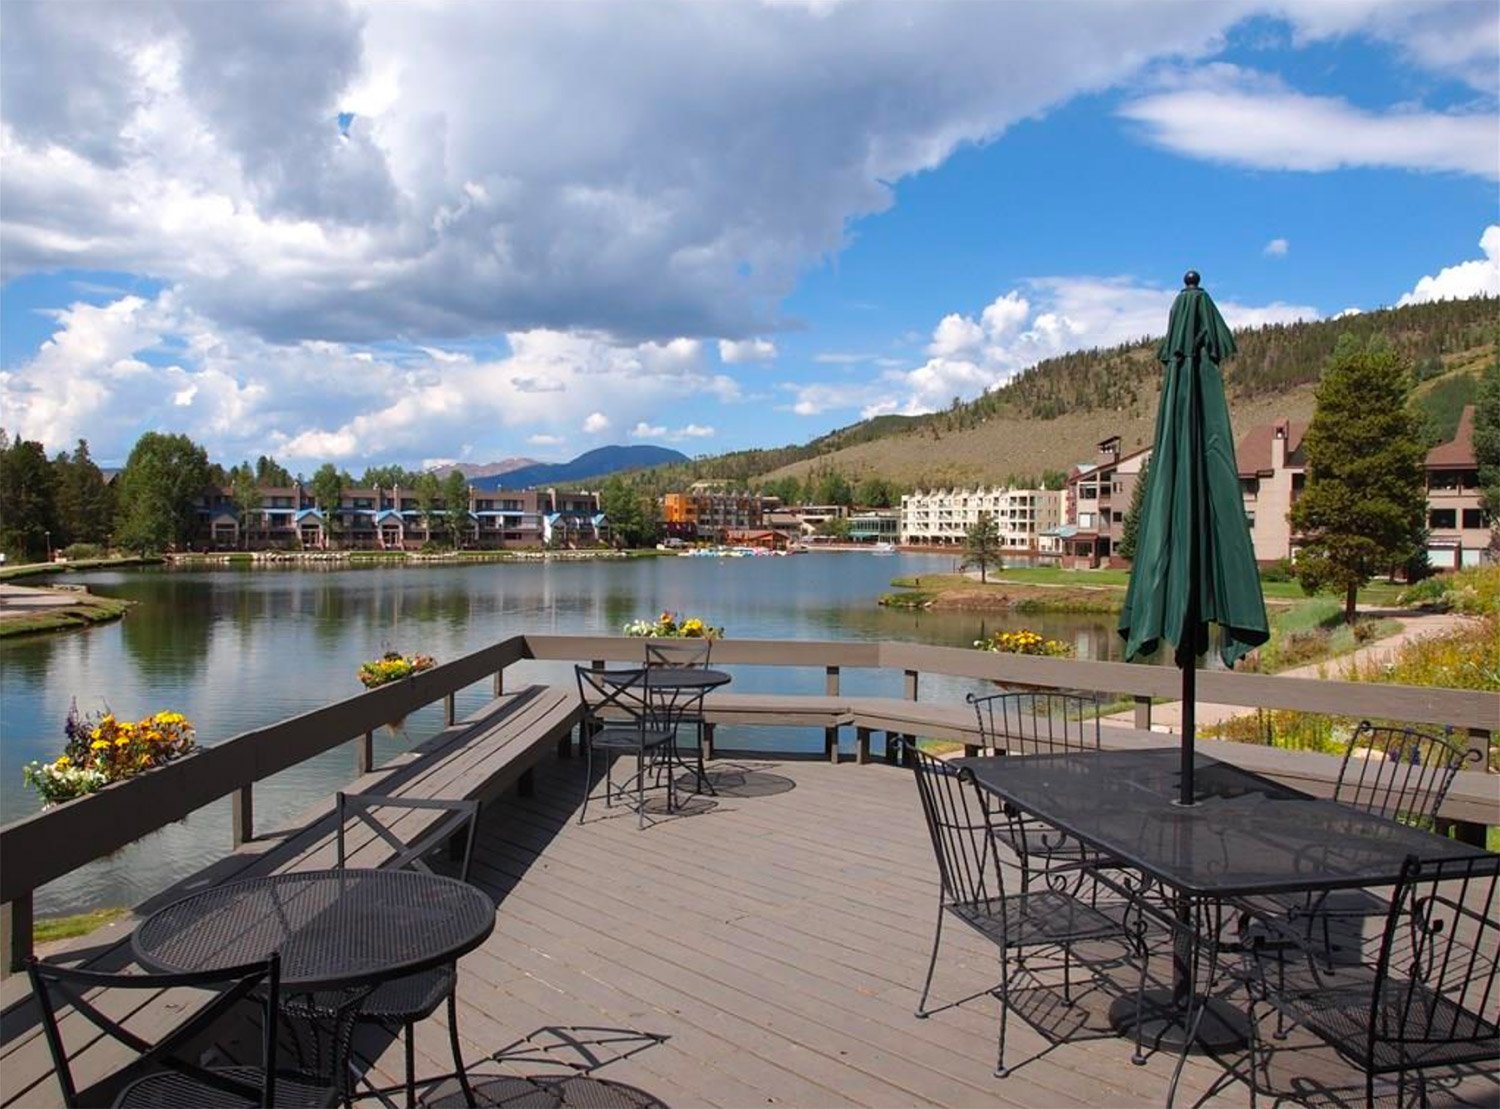 Lakeside at Keystone is the location of the Lenawee Condos